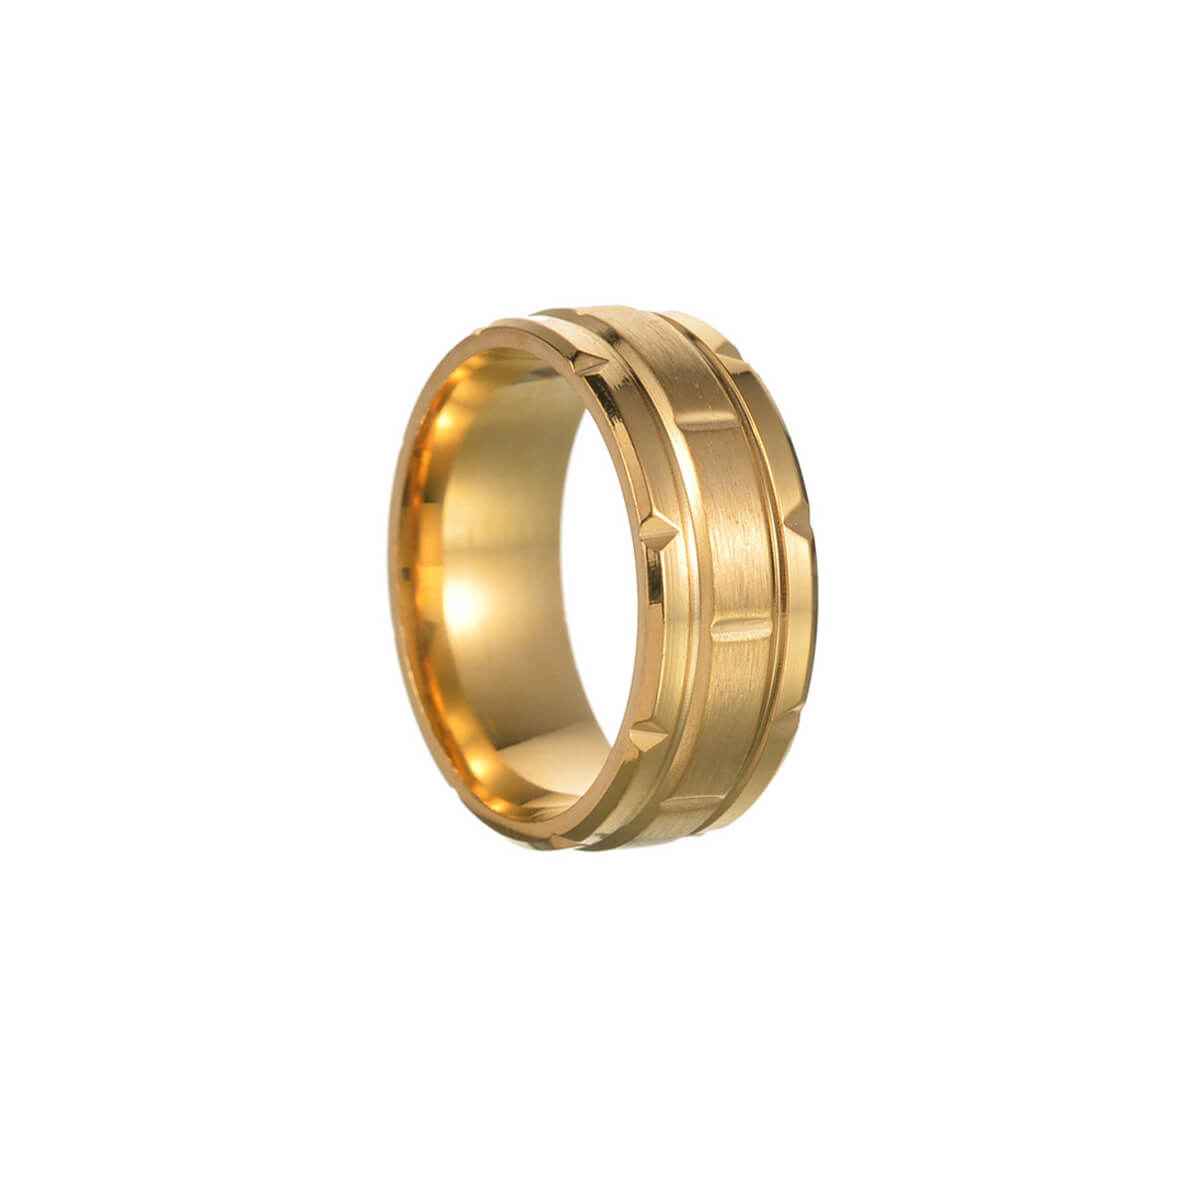 Textured steel ring 8mm gold plated (steel 316L)